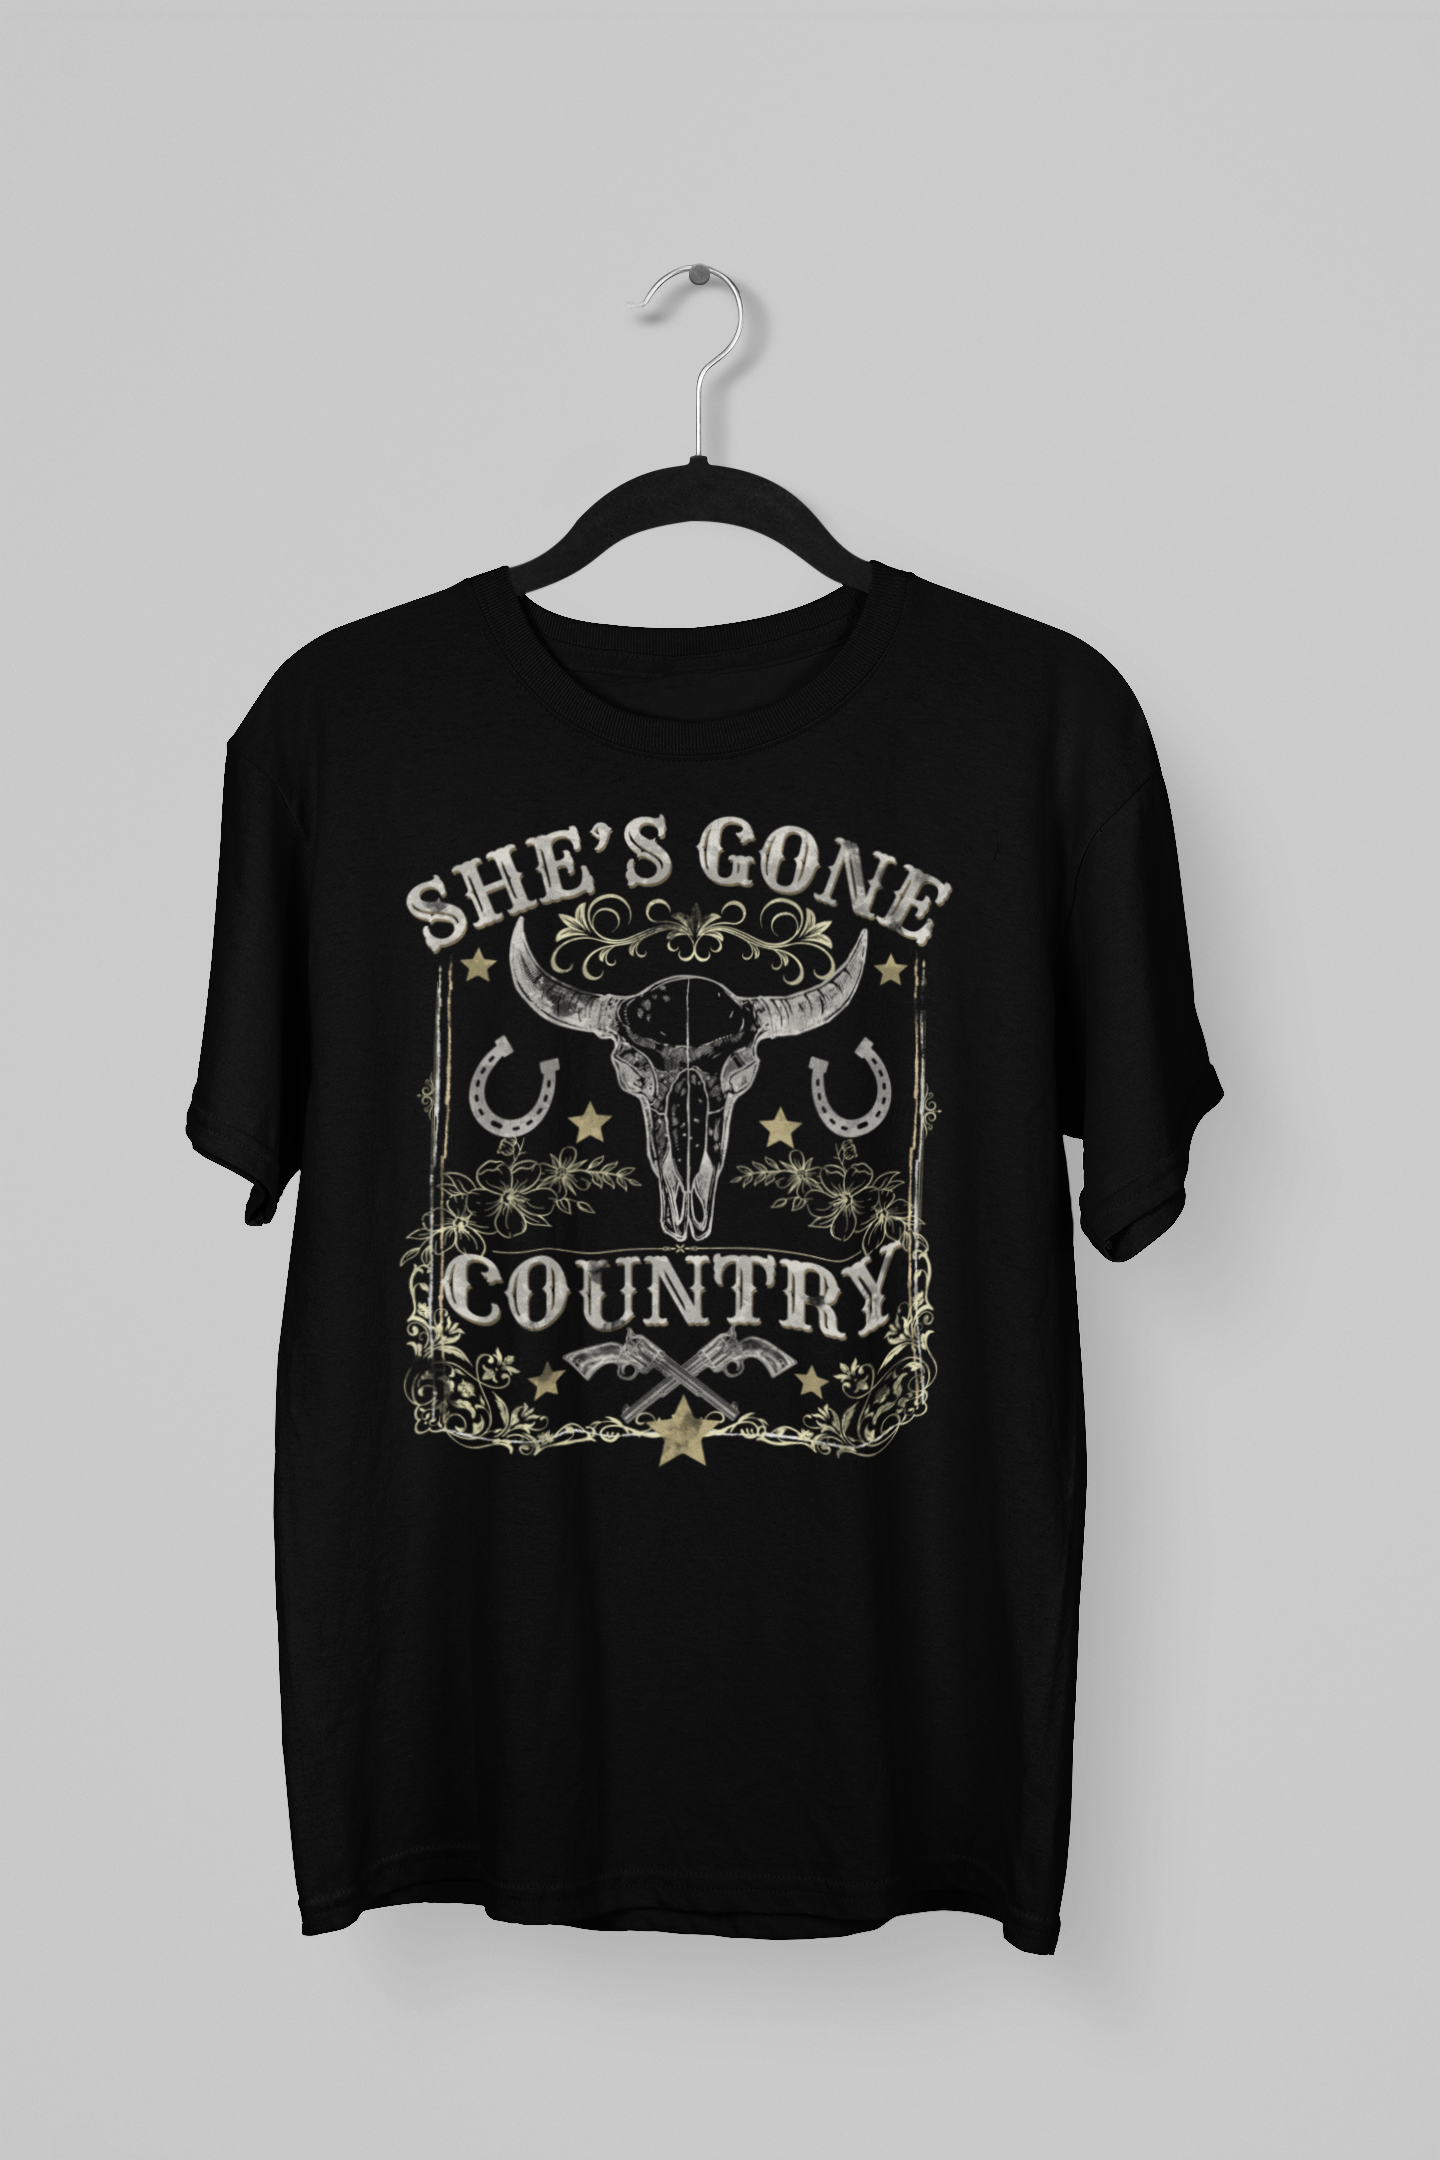 She's Gone Country